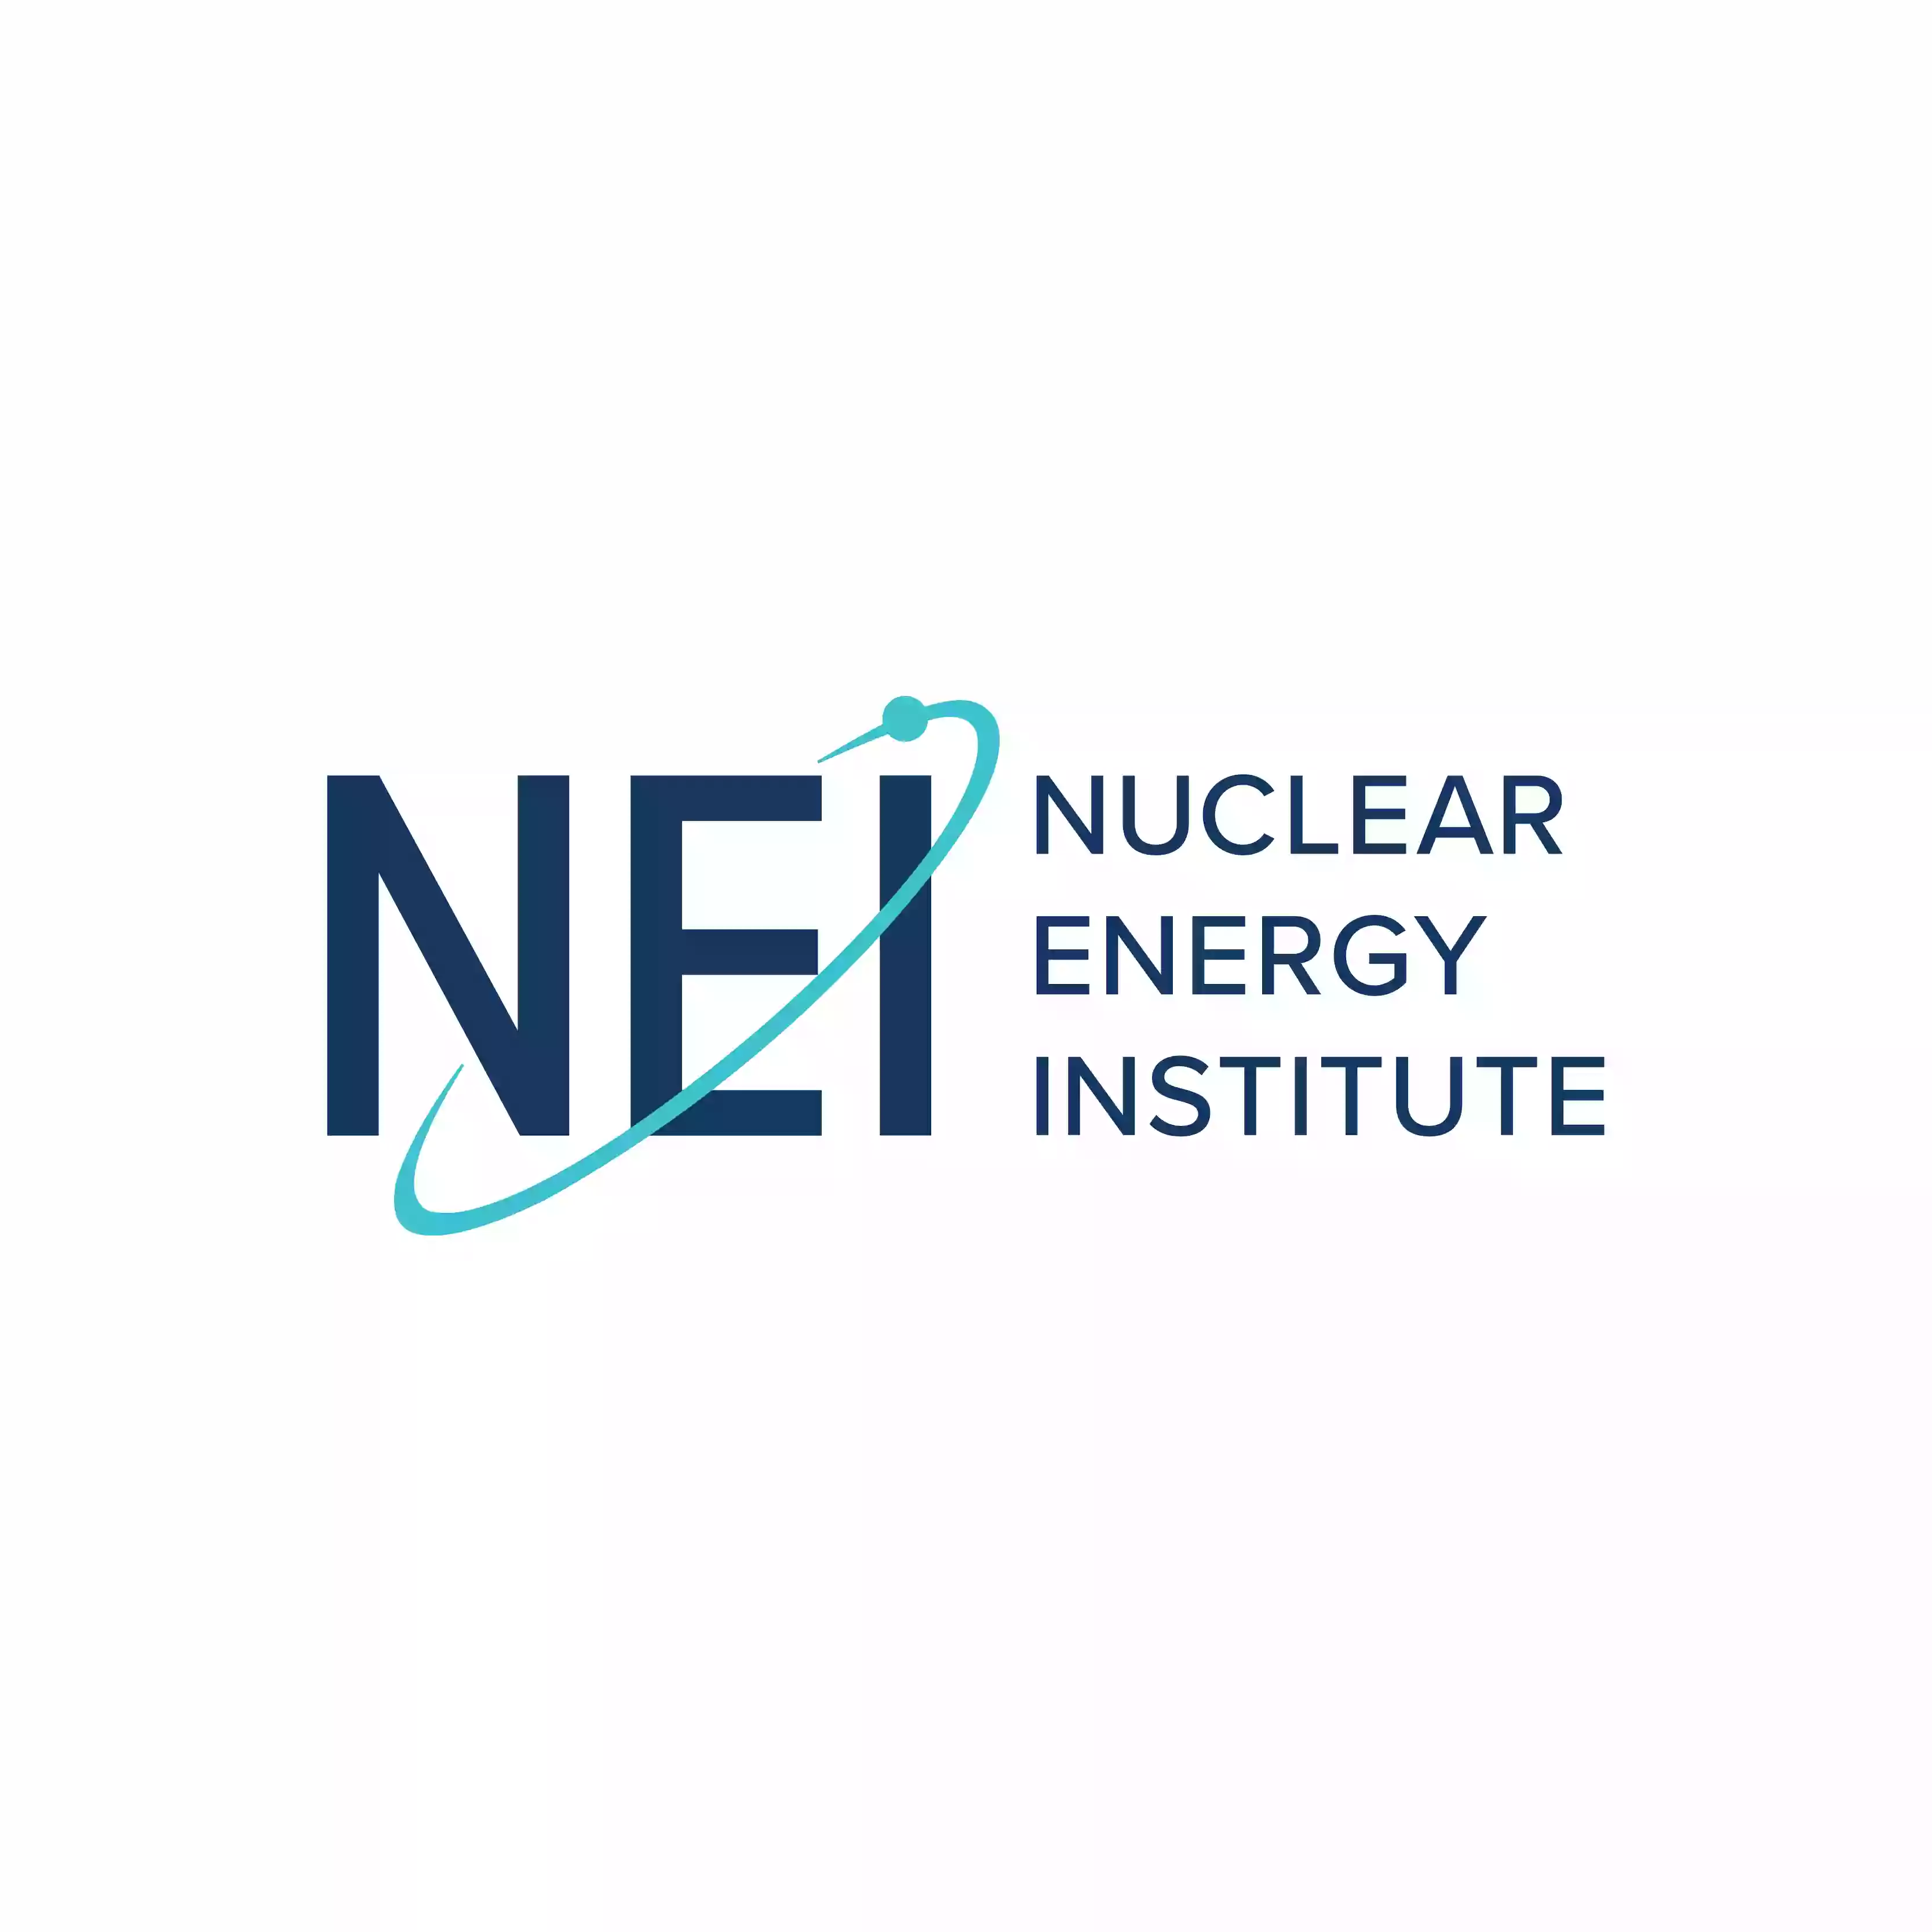 Nuclear Energy Institute